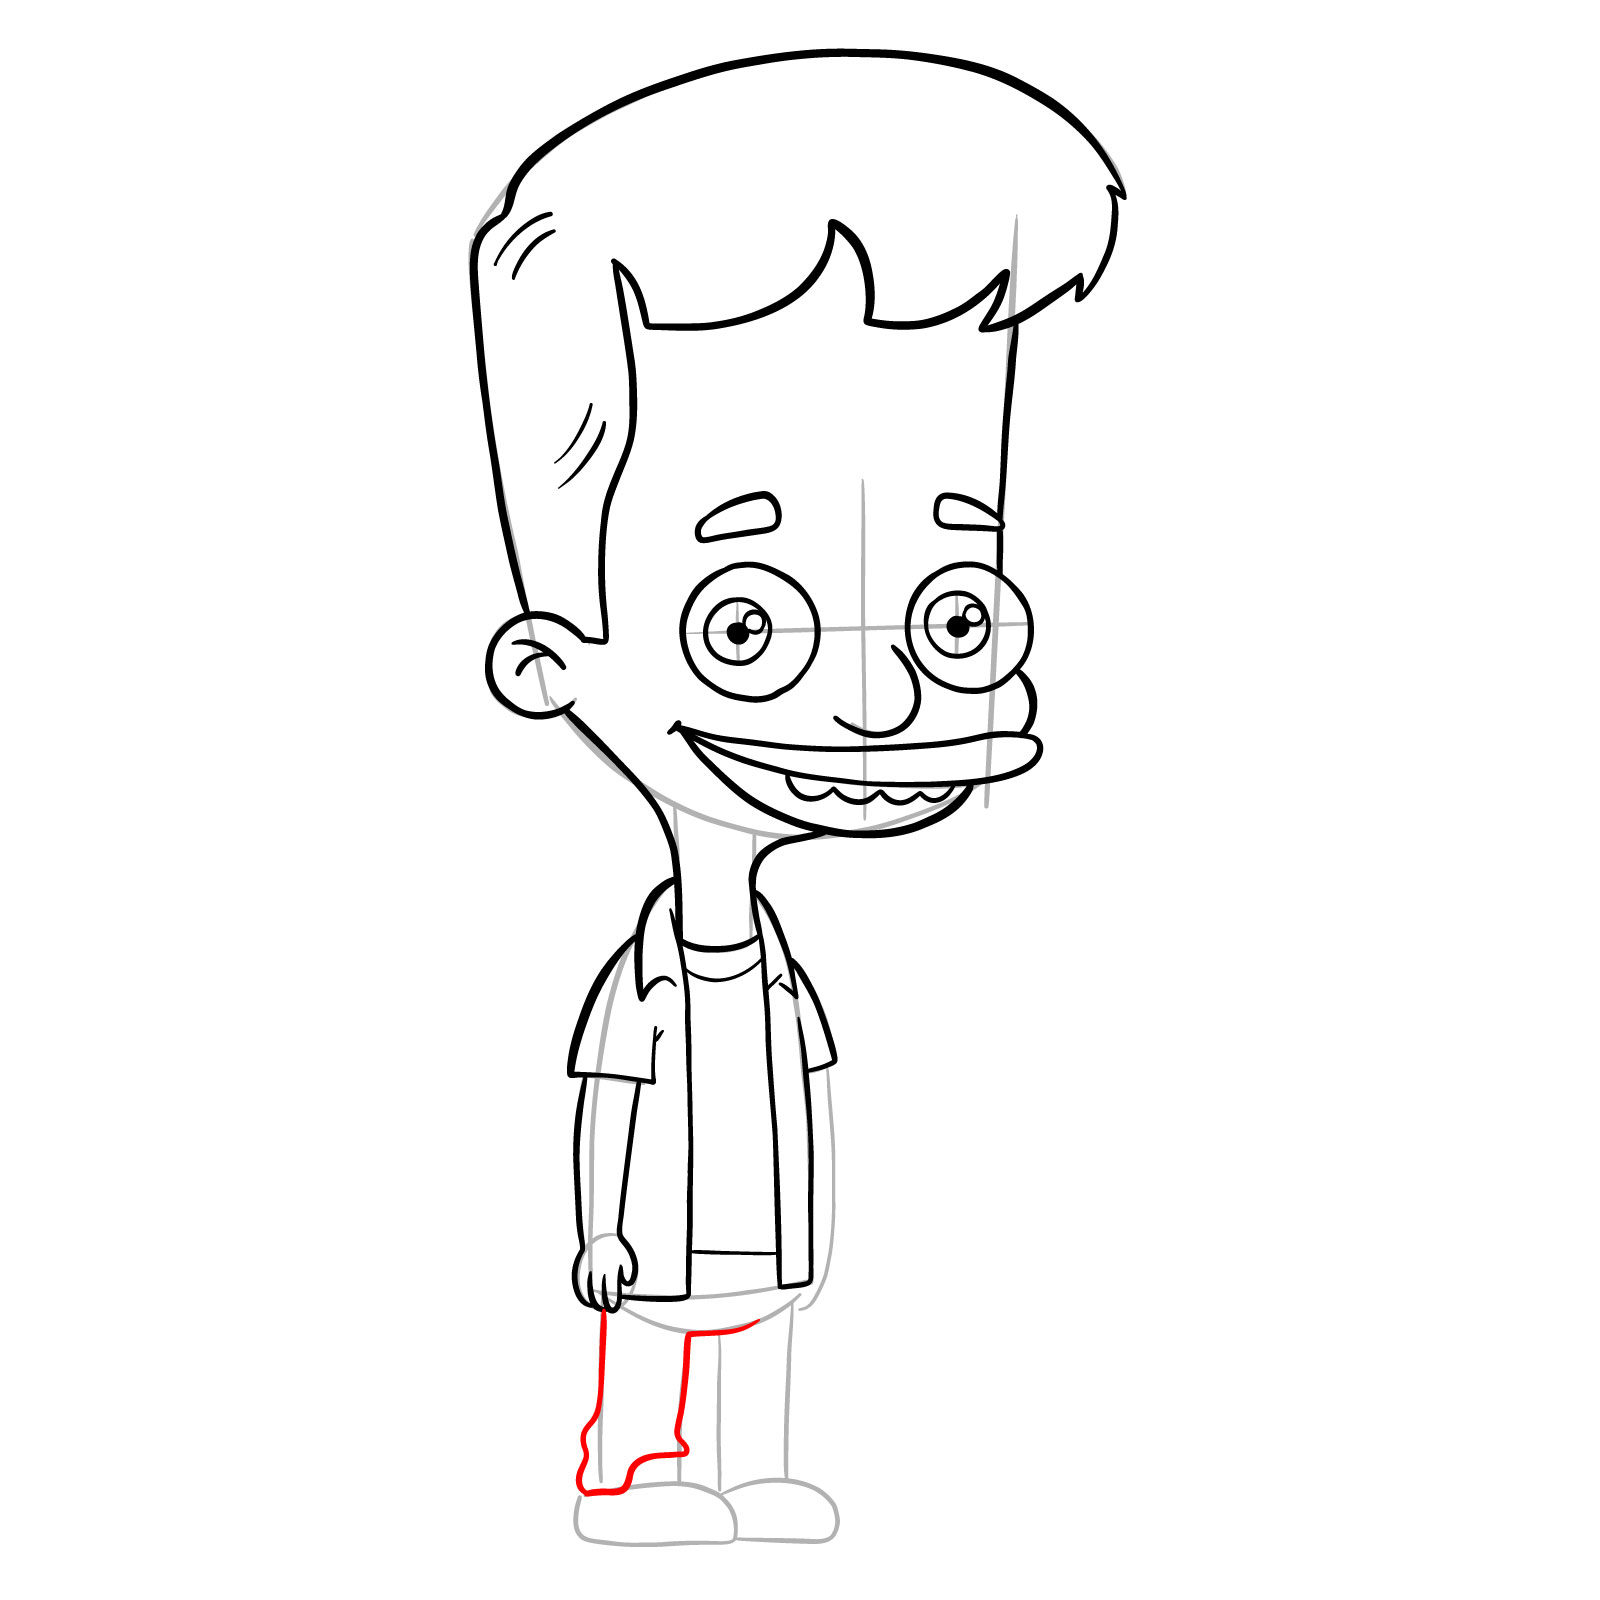 How to draw Nick Birch from Big Mouth - step 20